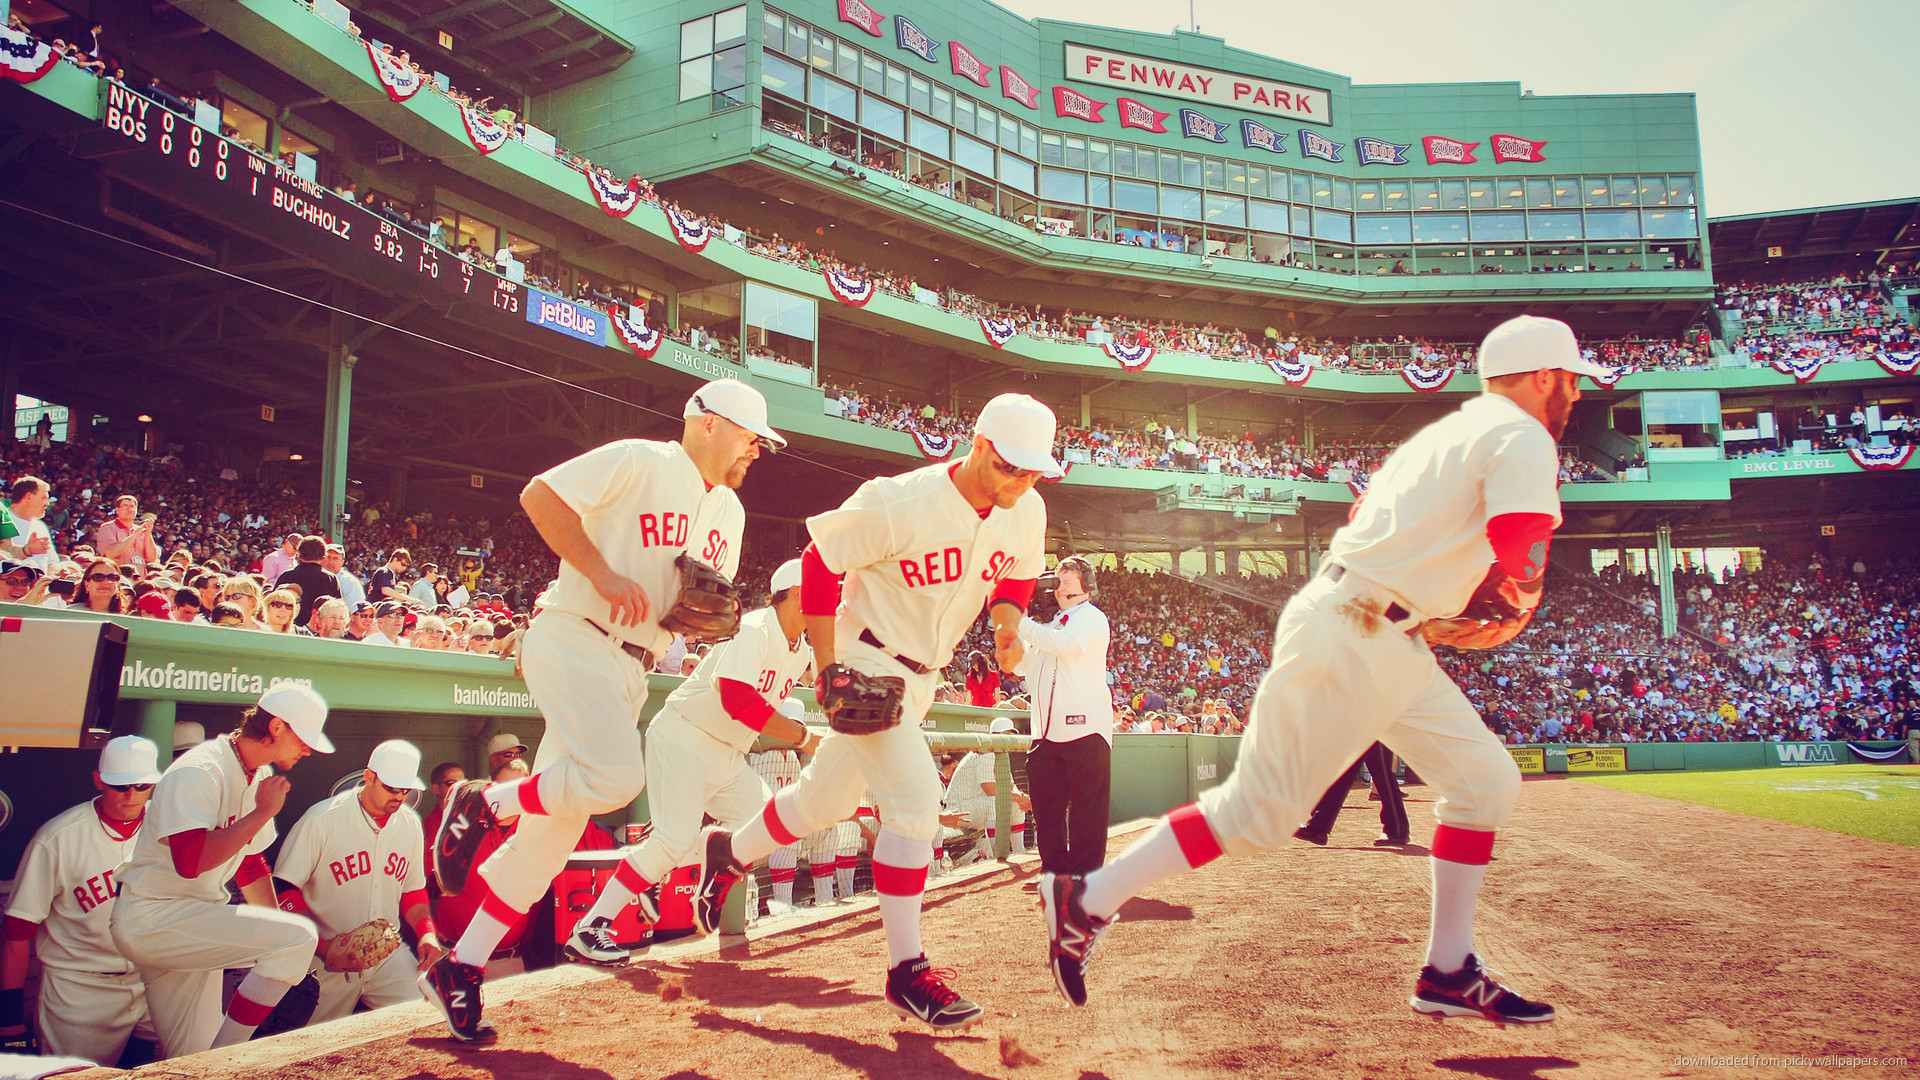 1920x1080 Boston Red Sox Stadium Wallpaper. Boston Red Sox starting the game picture.